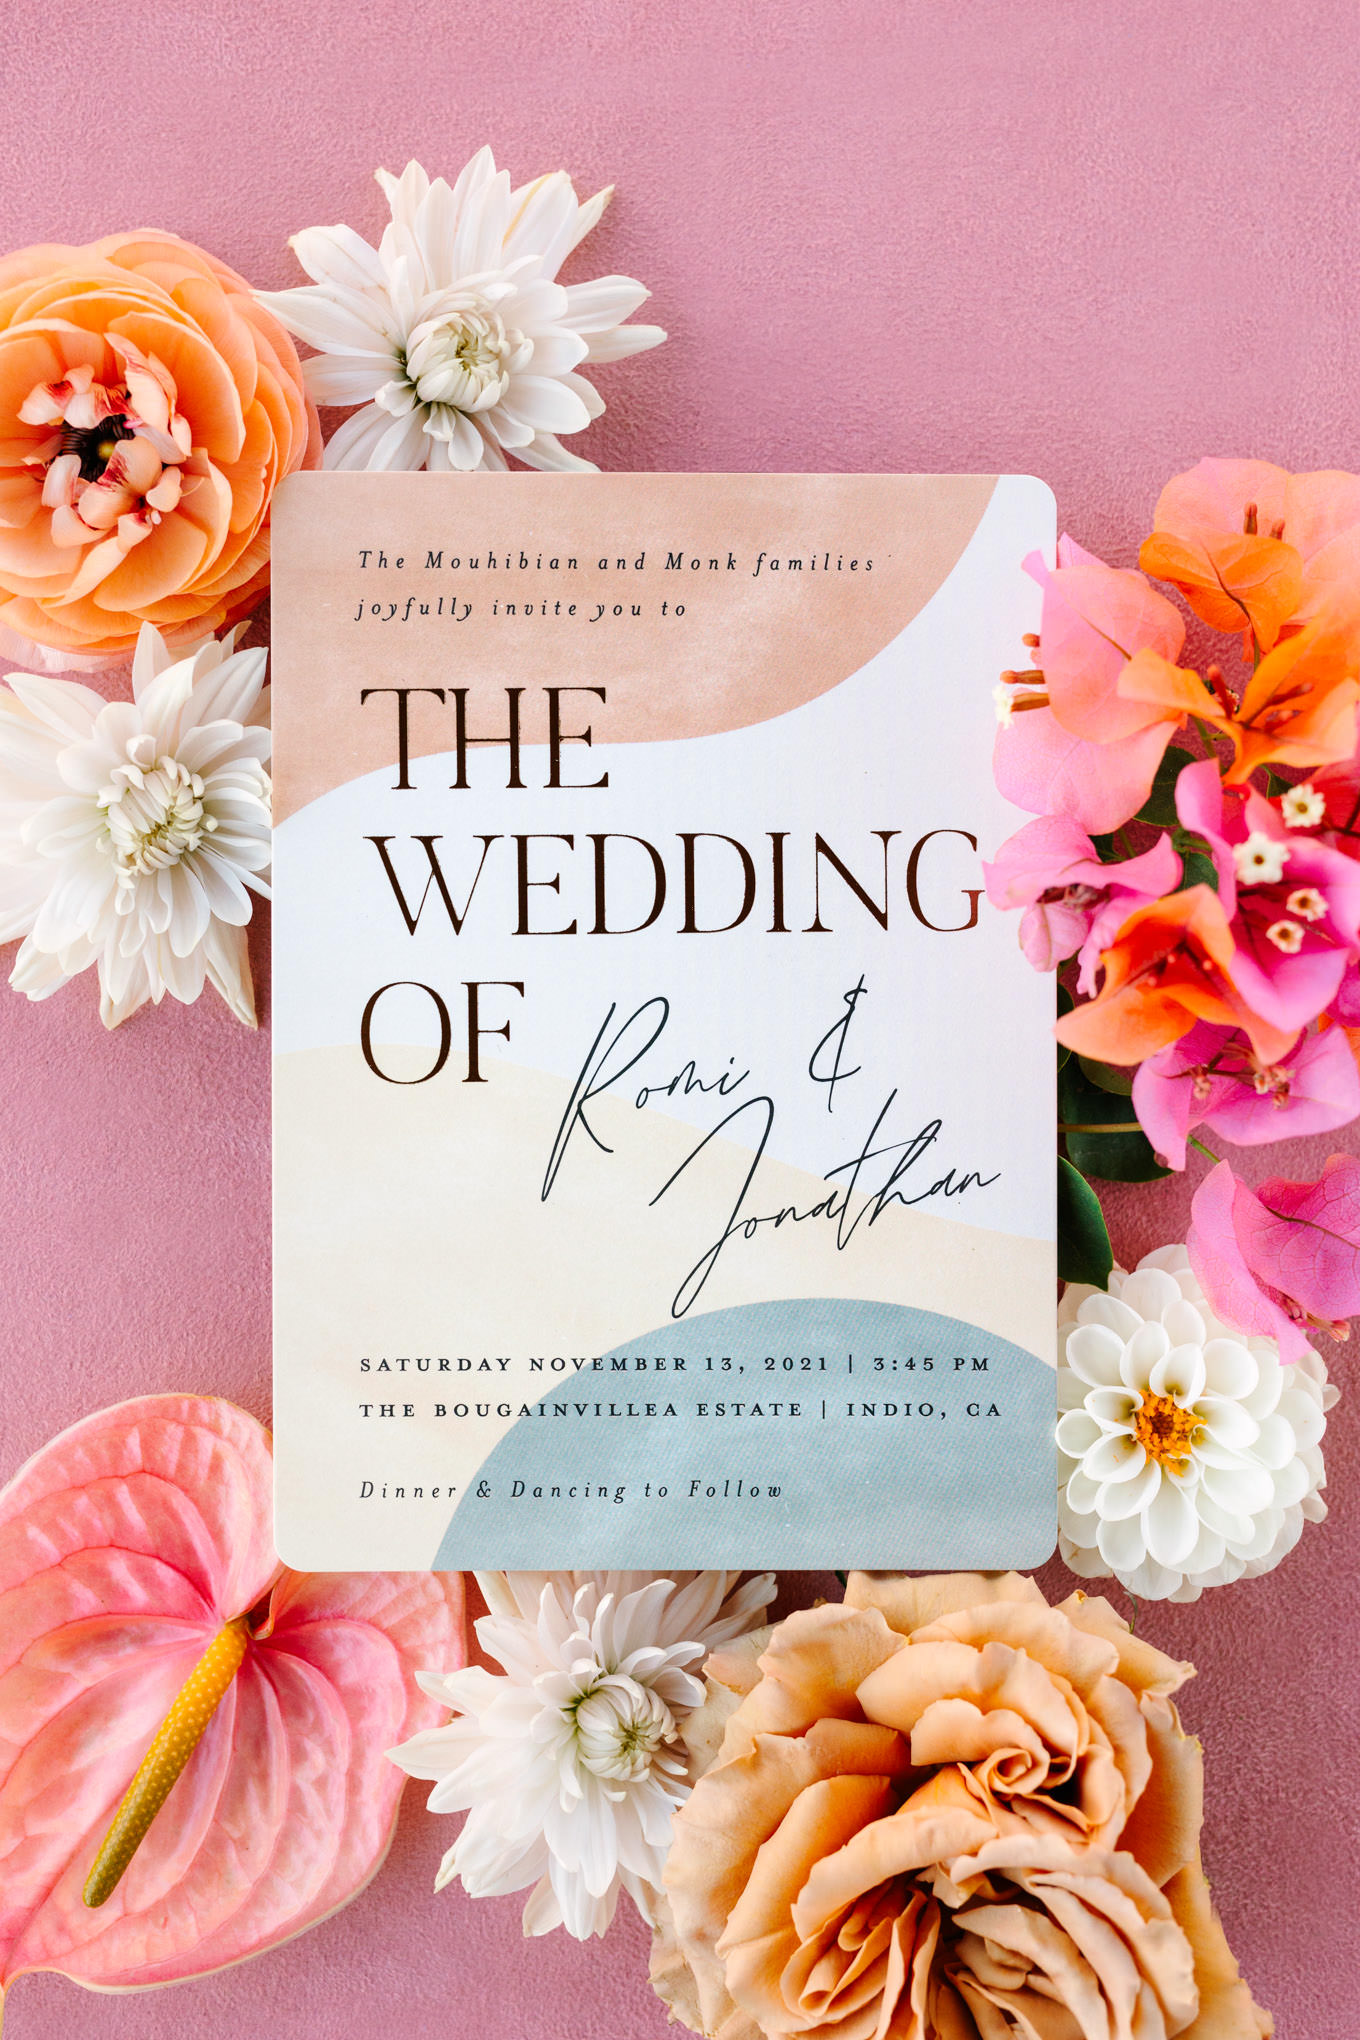 Wedding invitation | Pink Bougainvillea Estate wedding | Colorful LA wedding photography | #bougainvilleaestate #palmspringswedding #palmspringsweddingvenue #palmspringsphotographer Source: Mary Costa Photography | Los Angeles